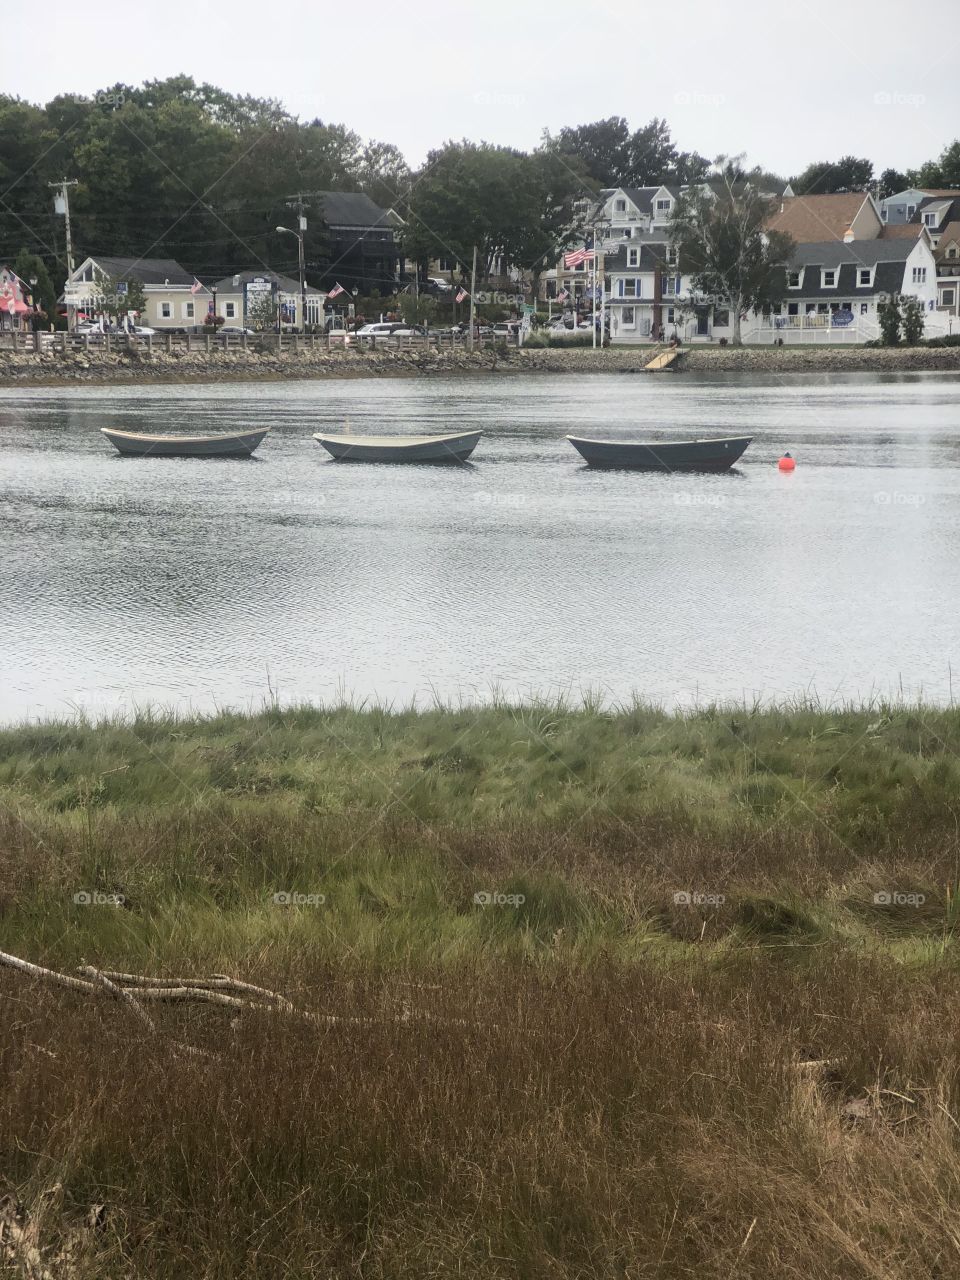 Three boats all in a row